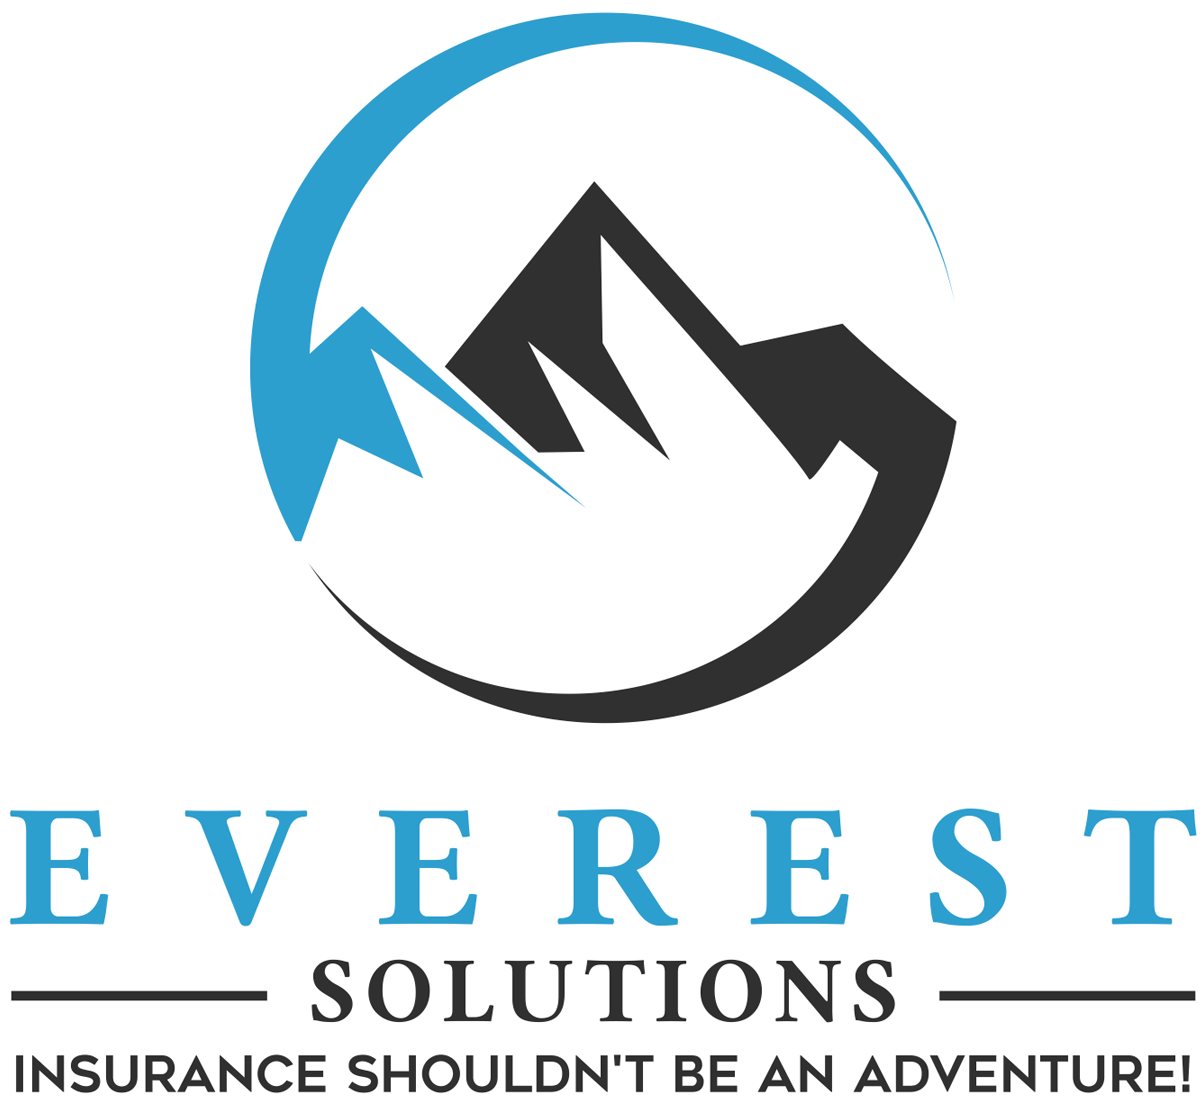 Everest Solutions Insurance :: Insurance Shouldn&#39;t Be An Adventure